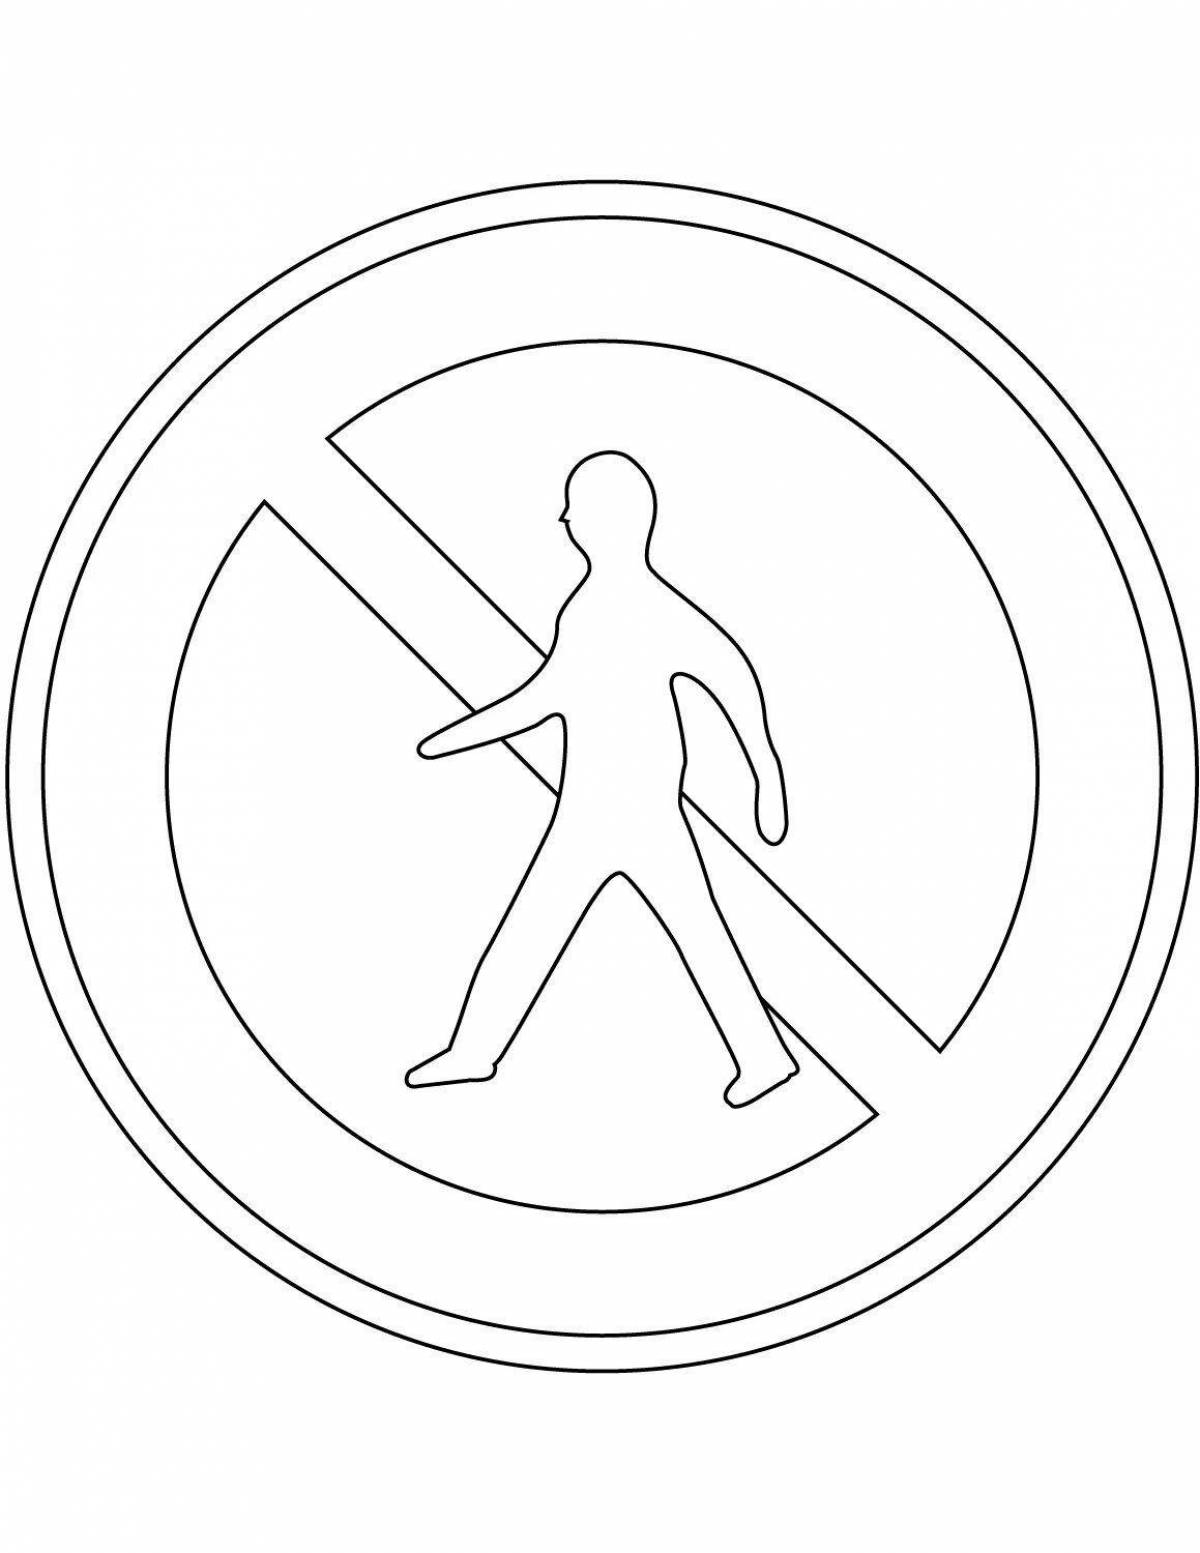 Pedestrian sign coloring page